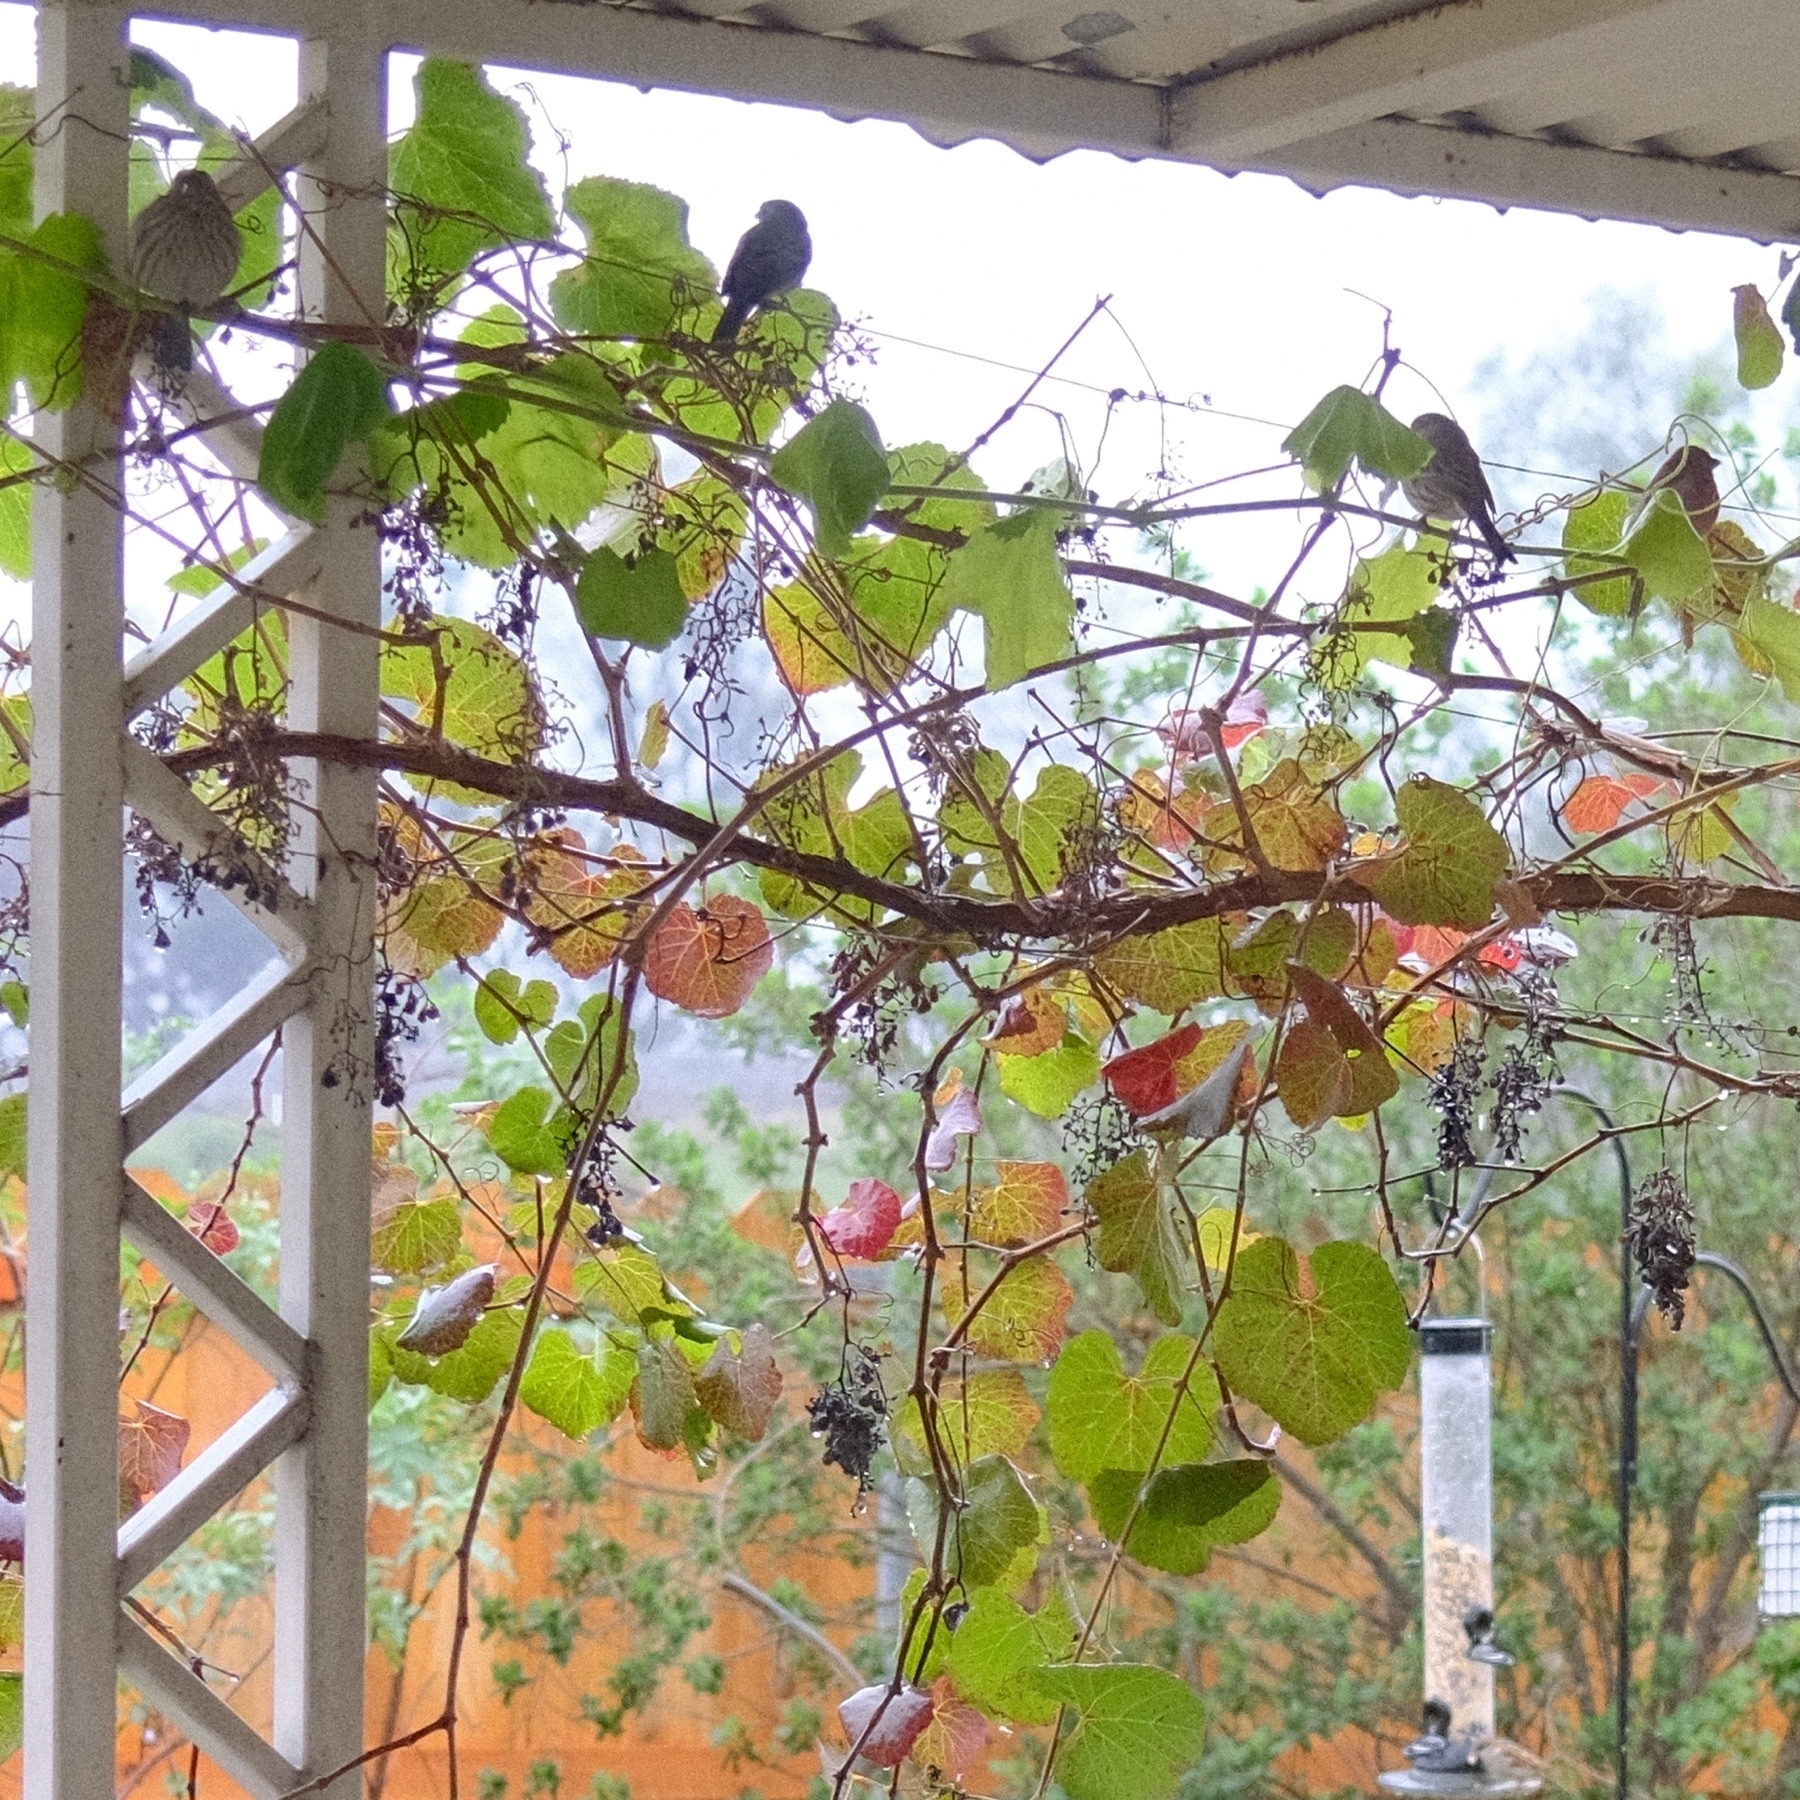 four or so birds sheltering on a grape vine